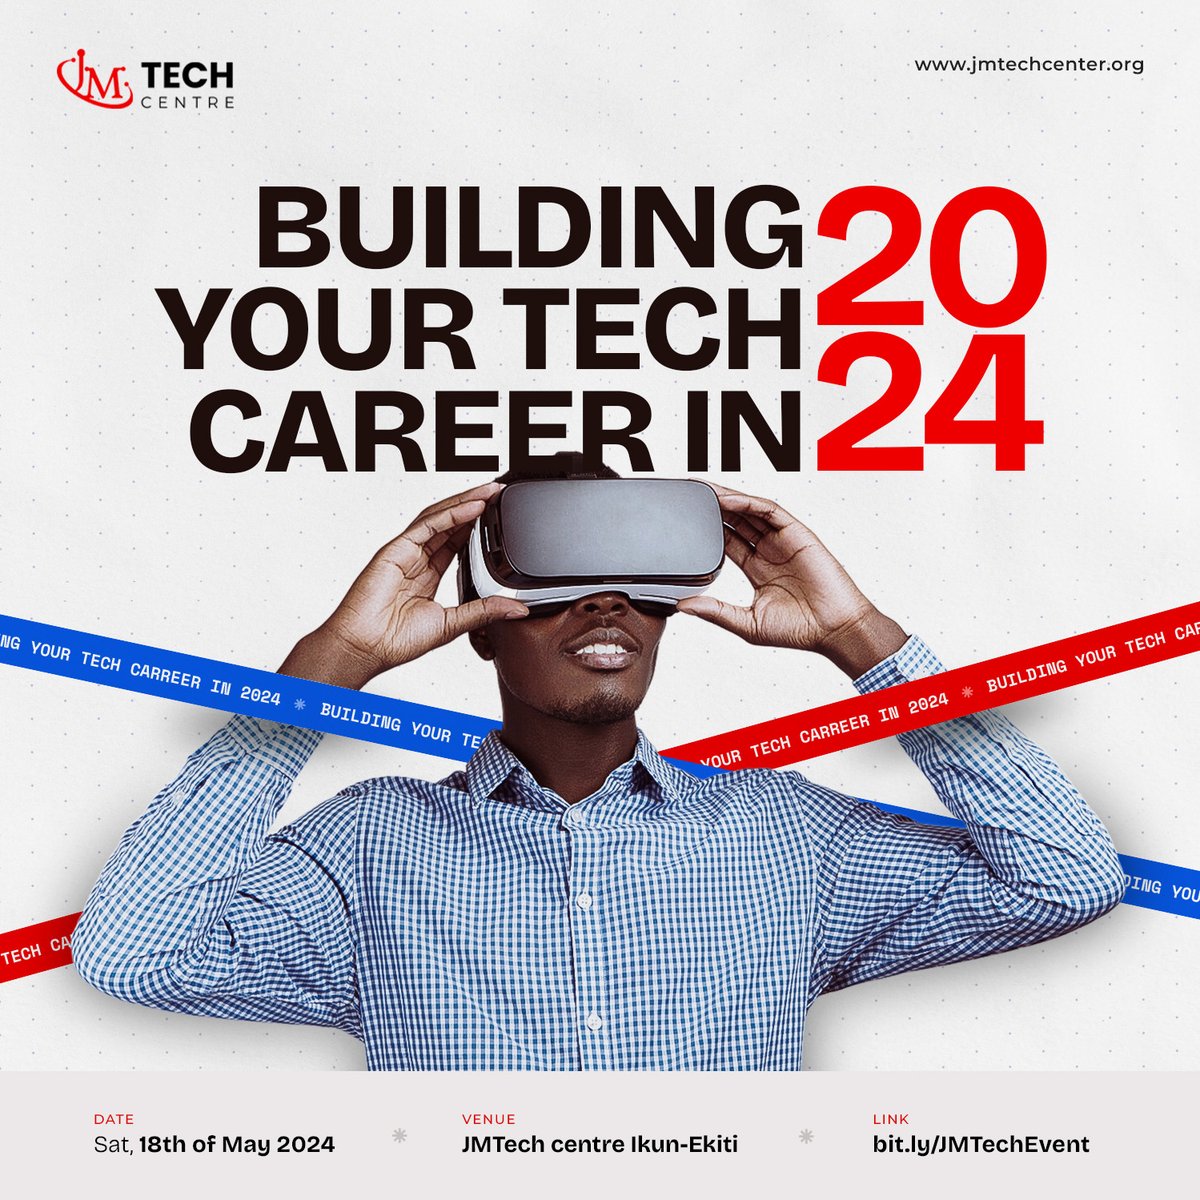 Ready to start a career in tech?

Sign up for our event now an open a world of endless possibilities! 

bit.ly/4bltvEs

#techevent #techlover #techtrends